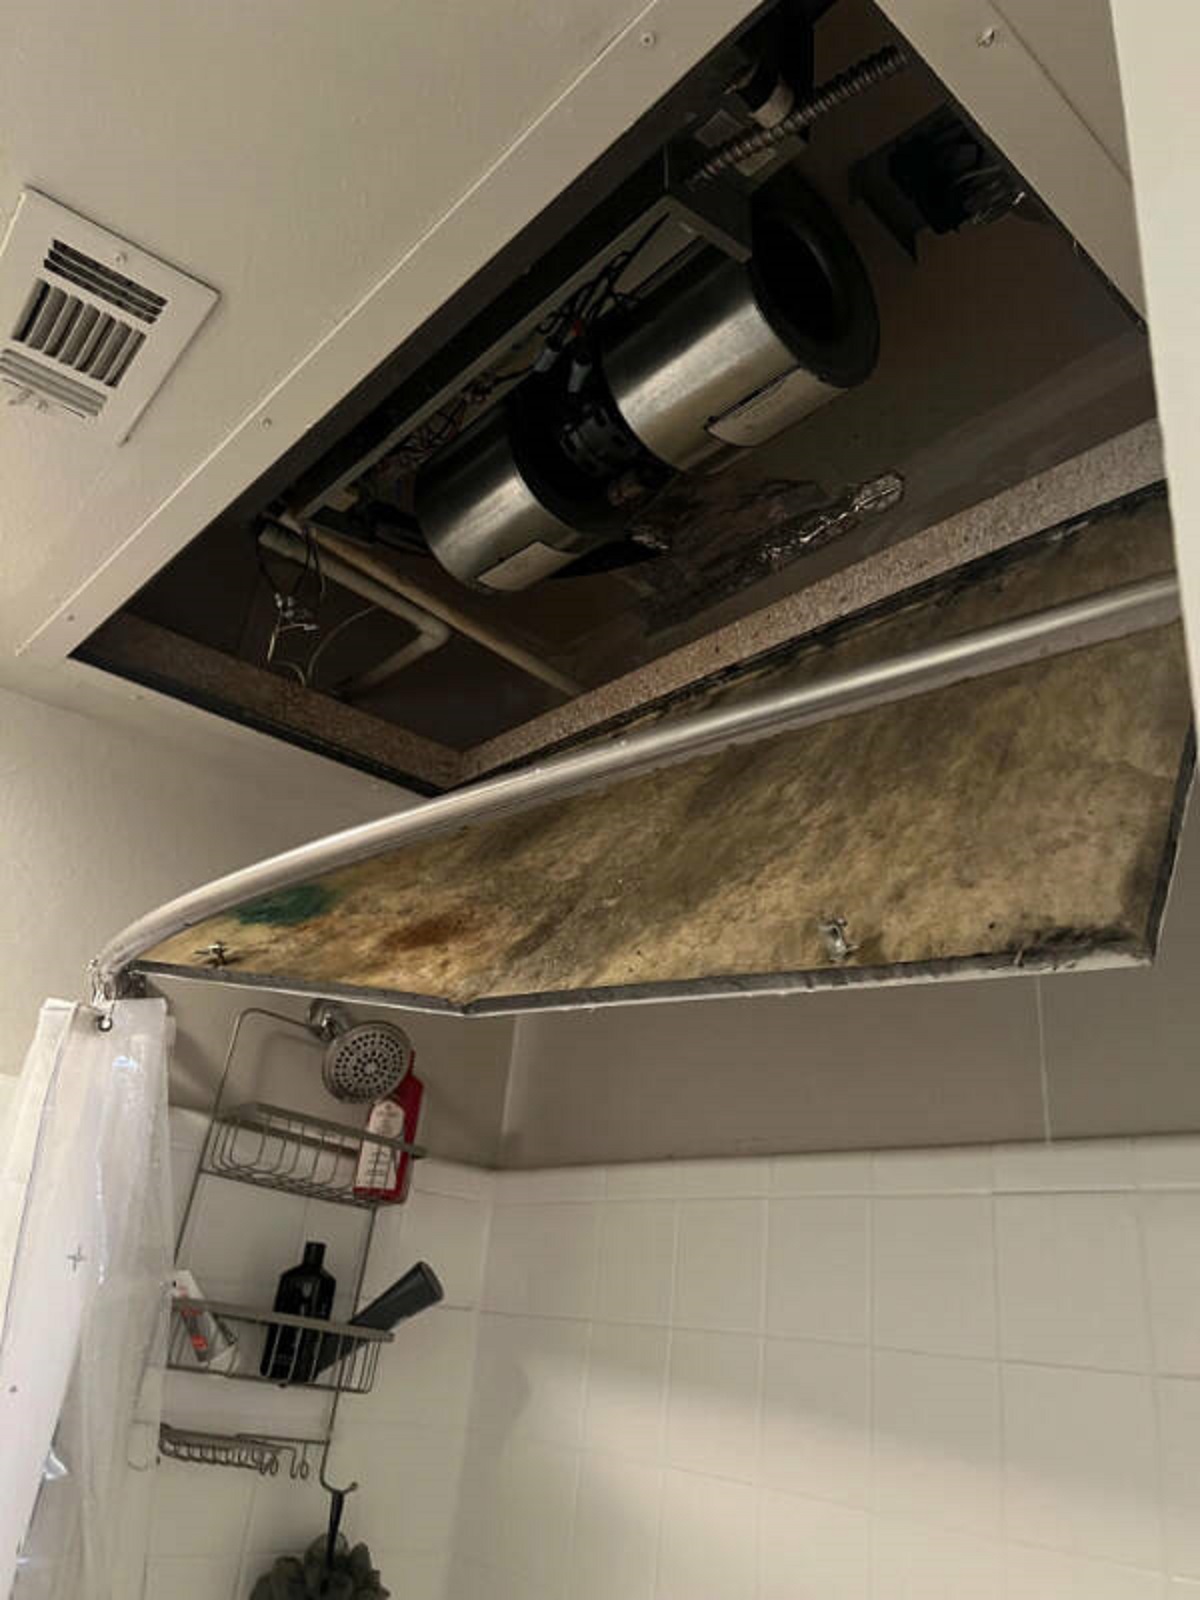 “This panel above my tub burst open at 11pm and dumped water all over my bathroom”